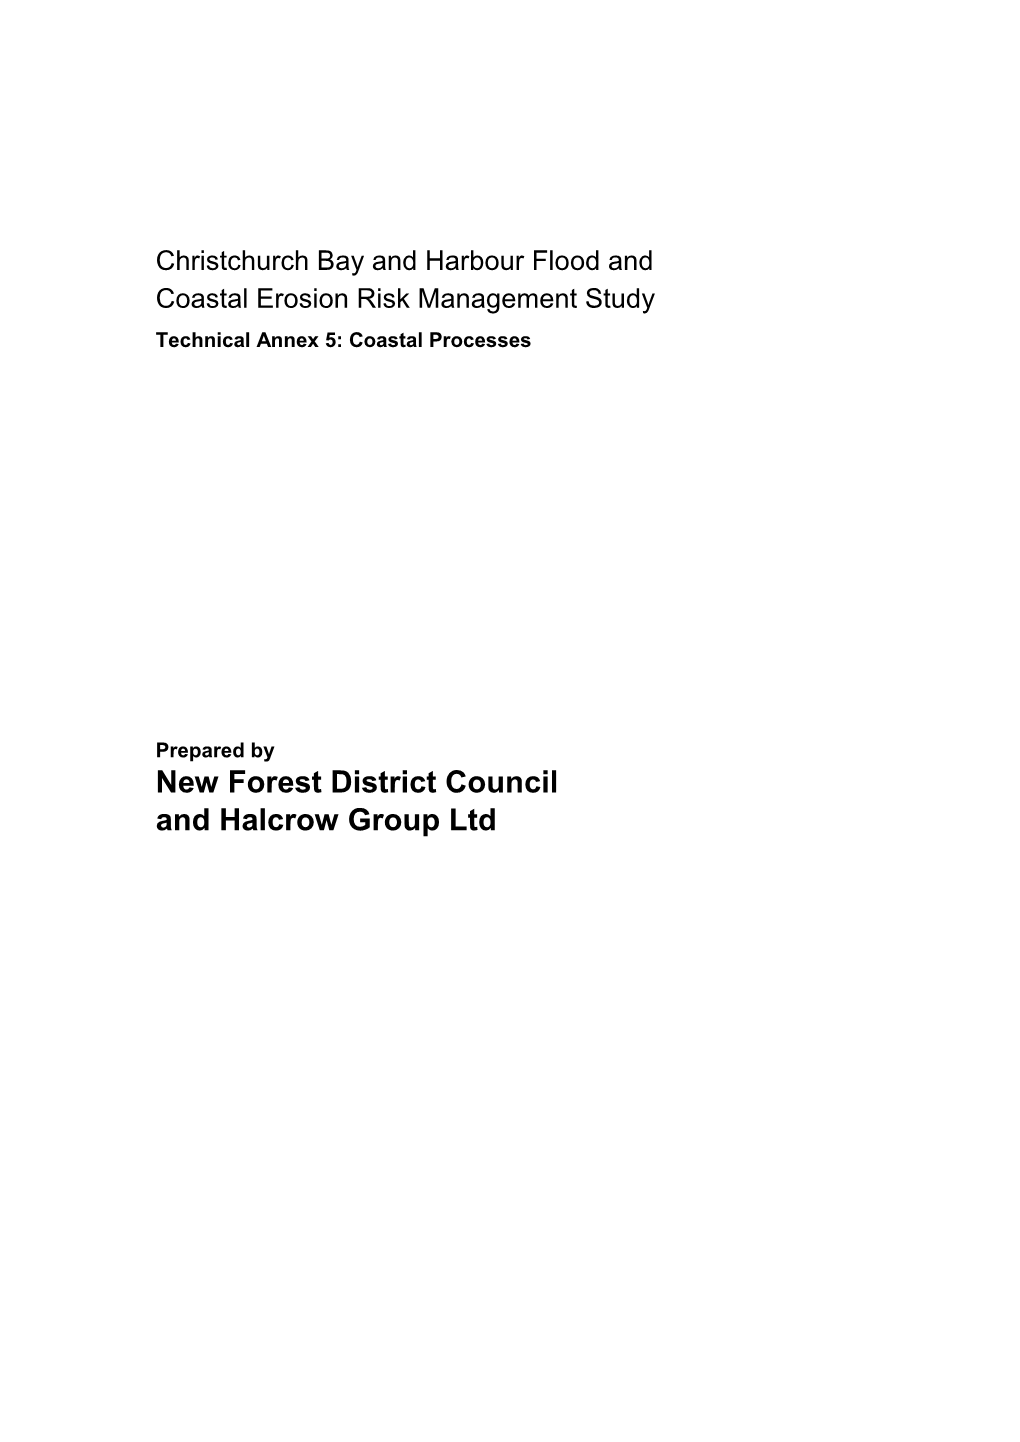 Christchurch Bay and Harbour Flood and Coastal Erosion Risk Management Study Technical Annex 5: Coastal Processes